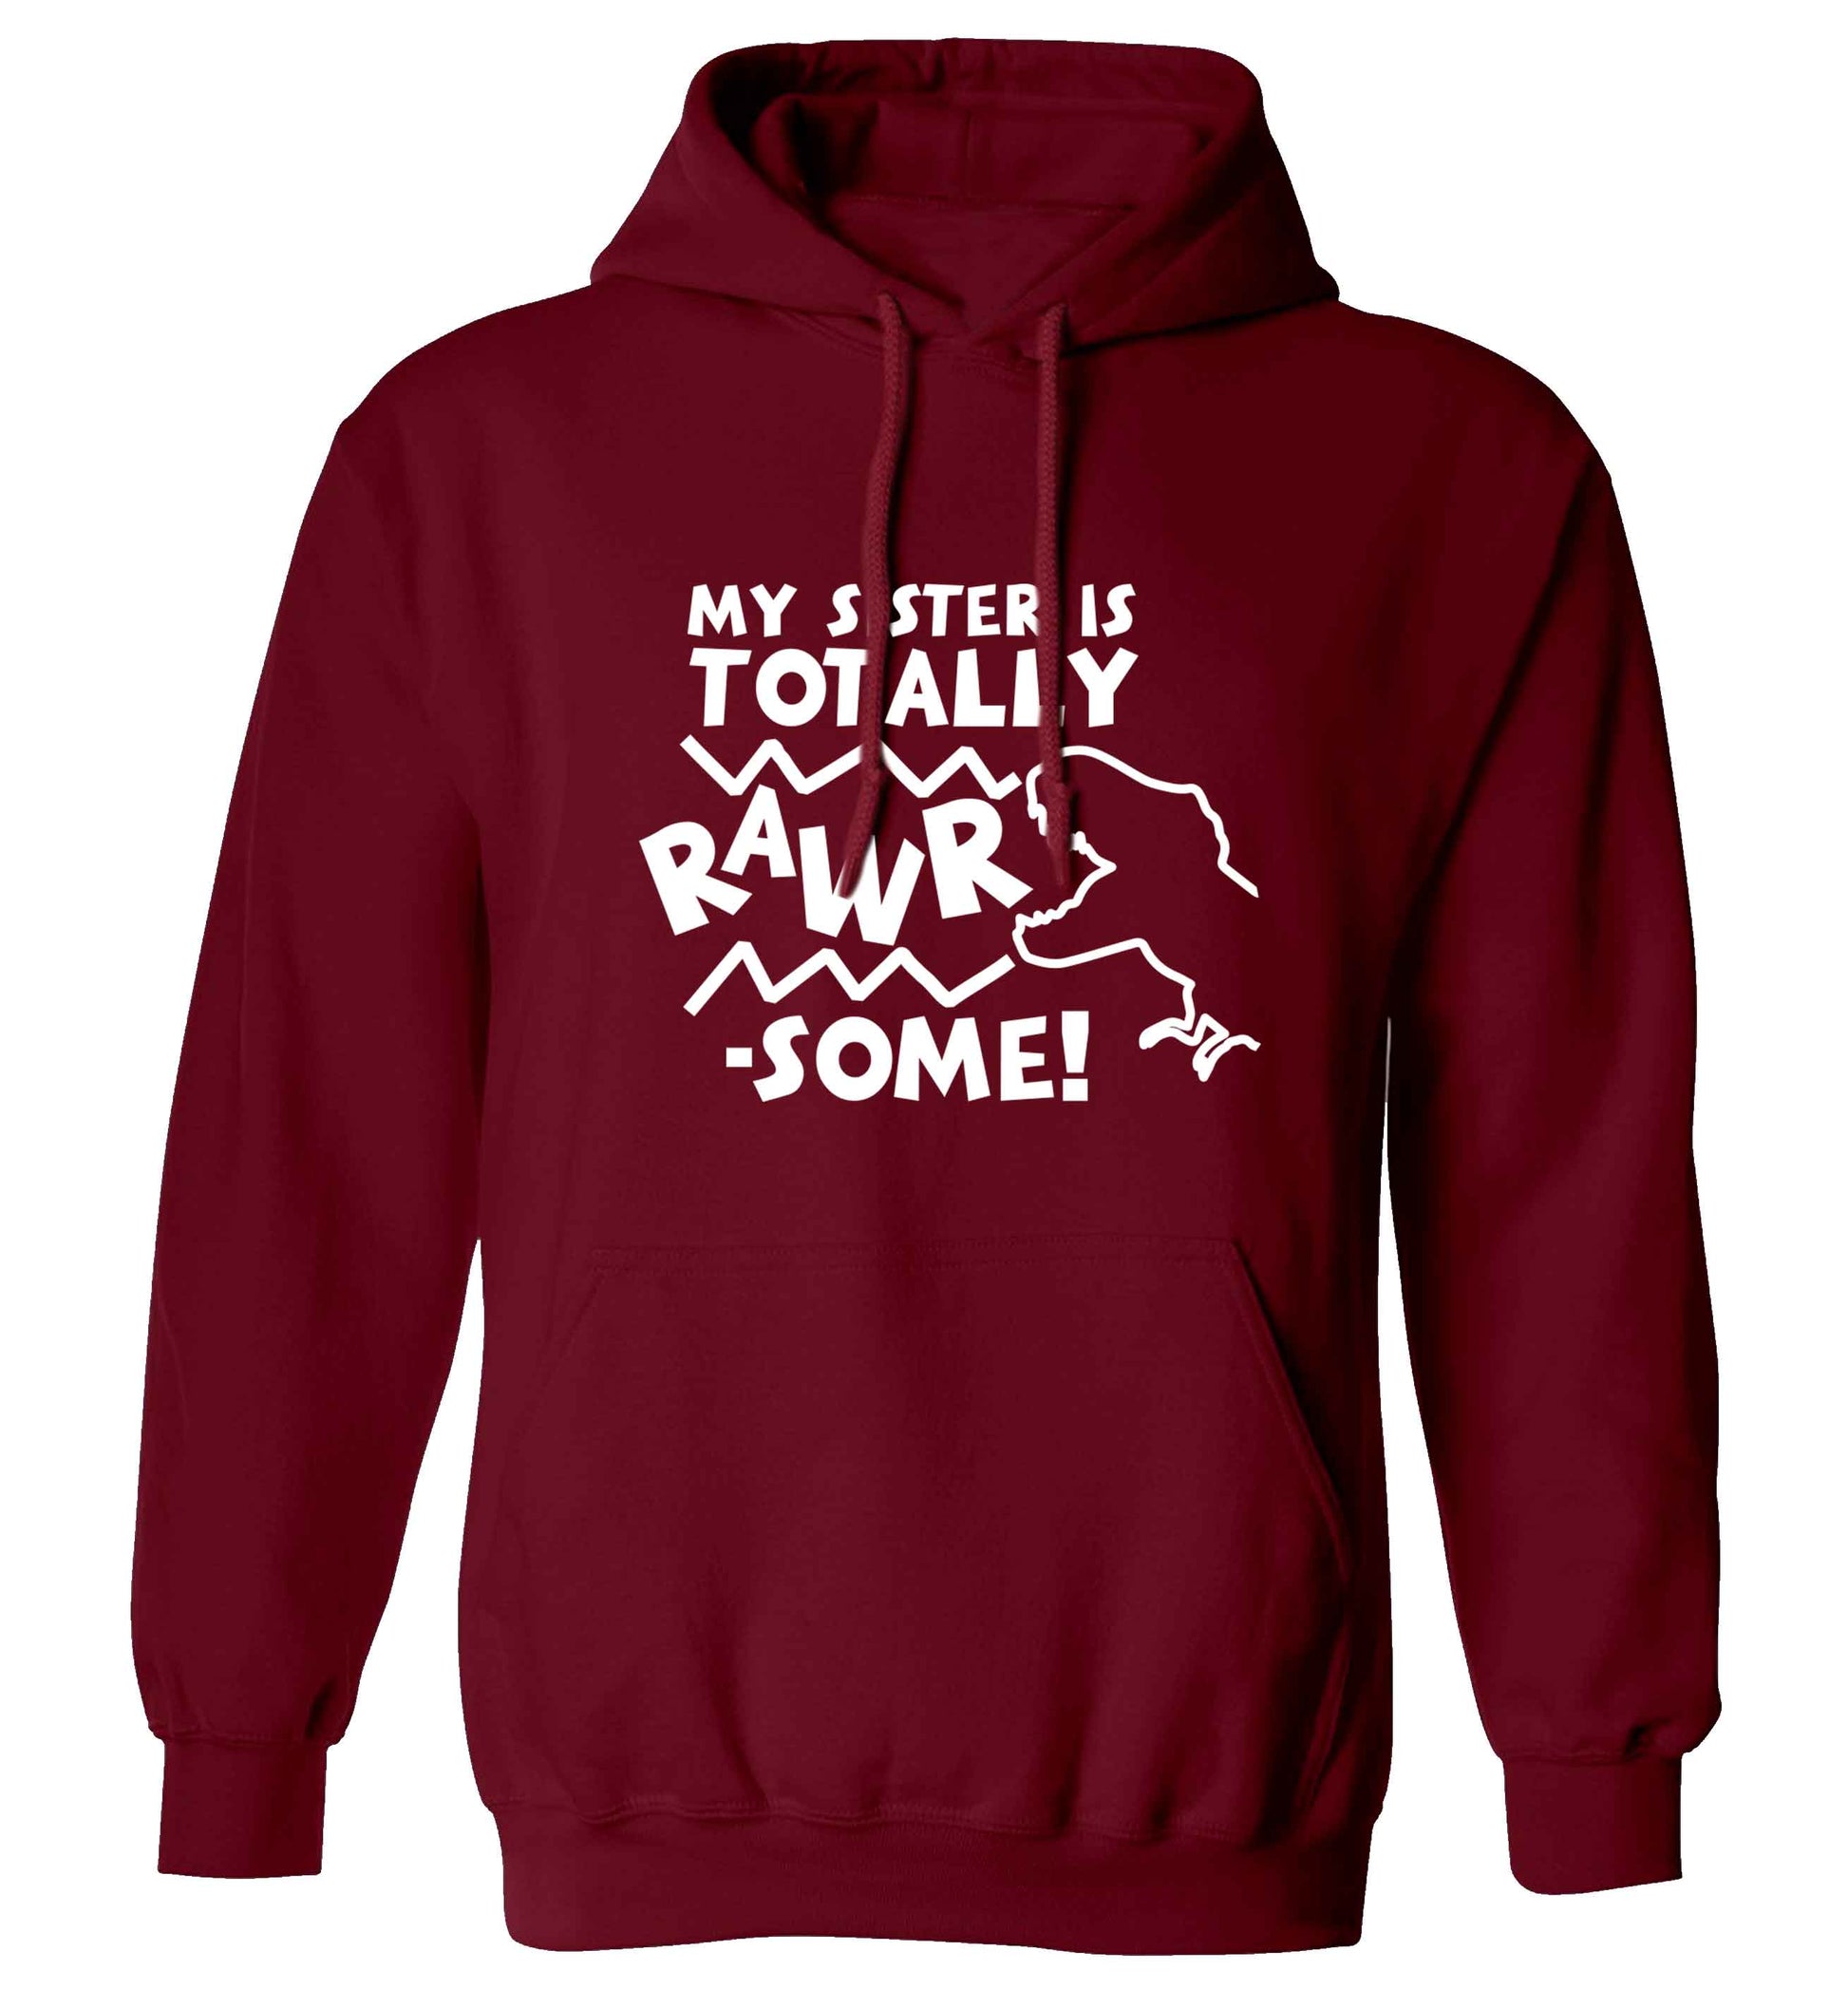 My sister is totally rawrsome adults unisex maroon hoodie 2XL